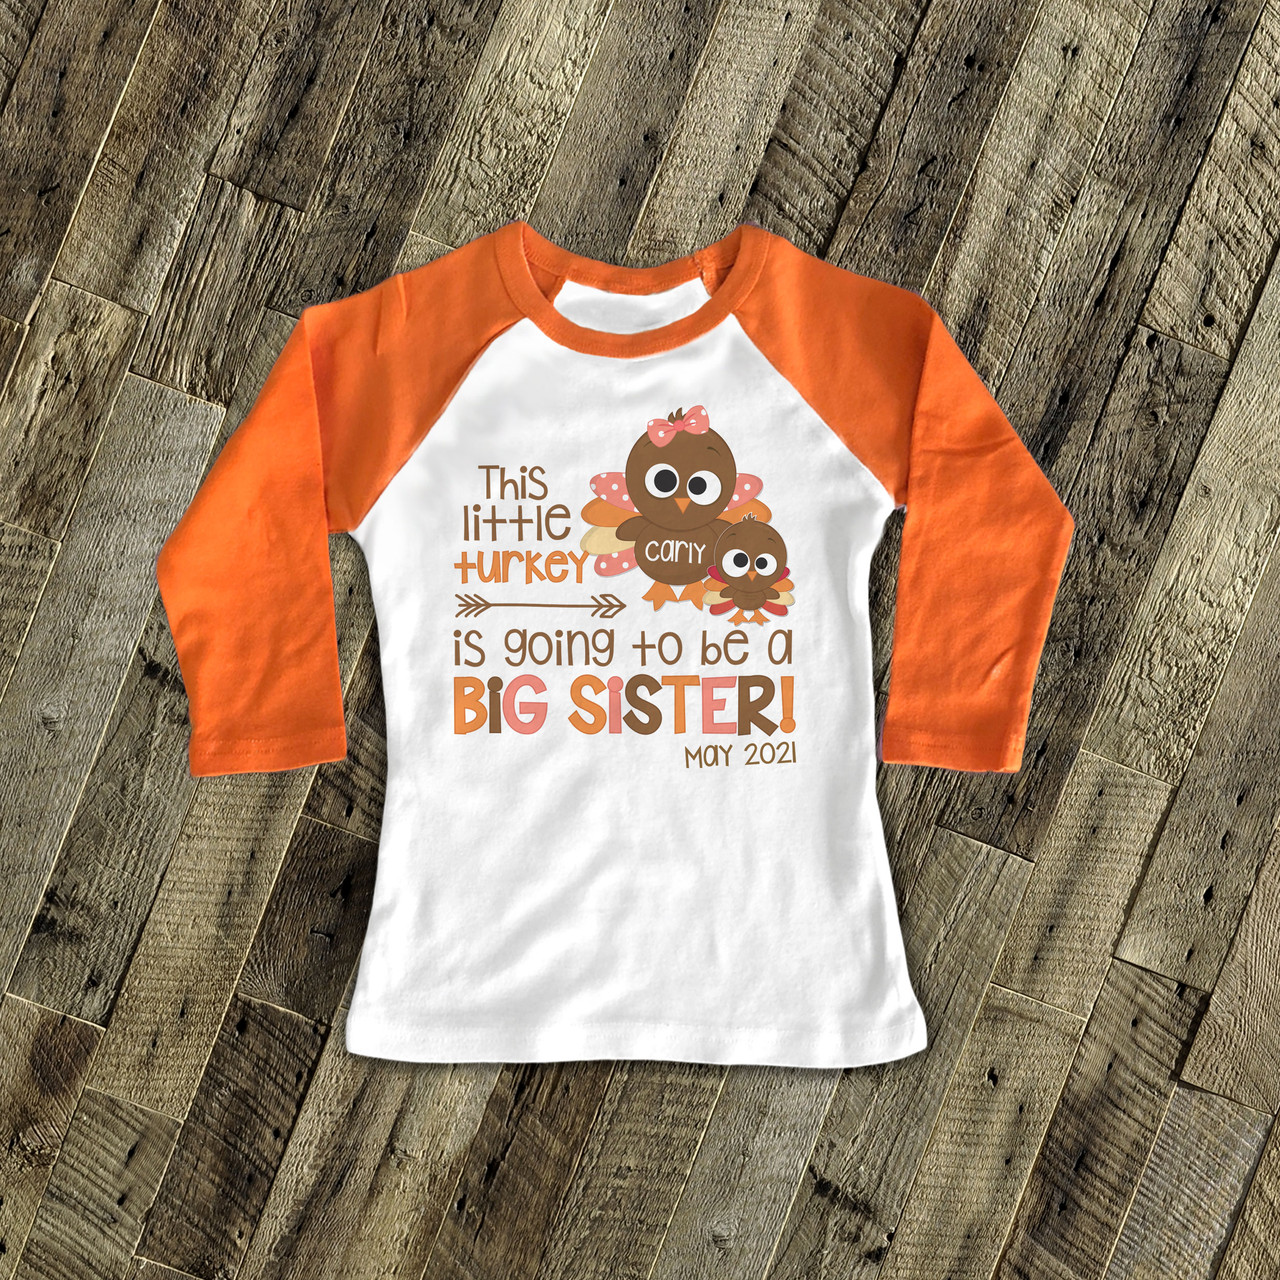 thanksgiving shirts for babies